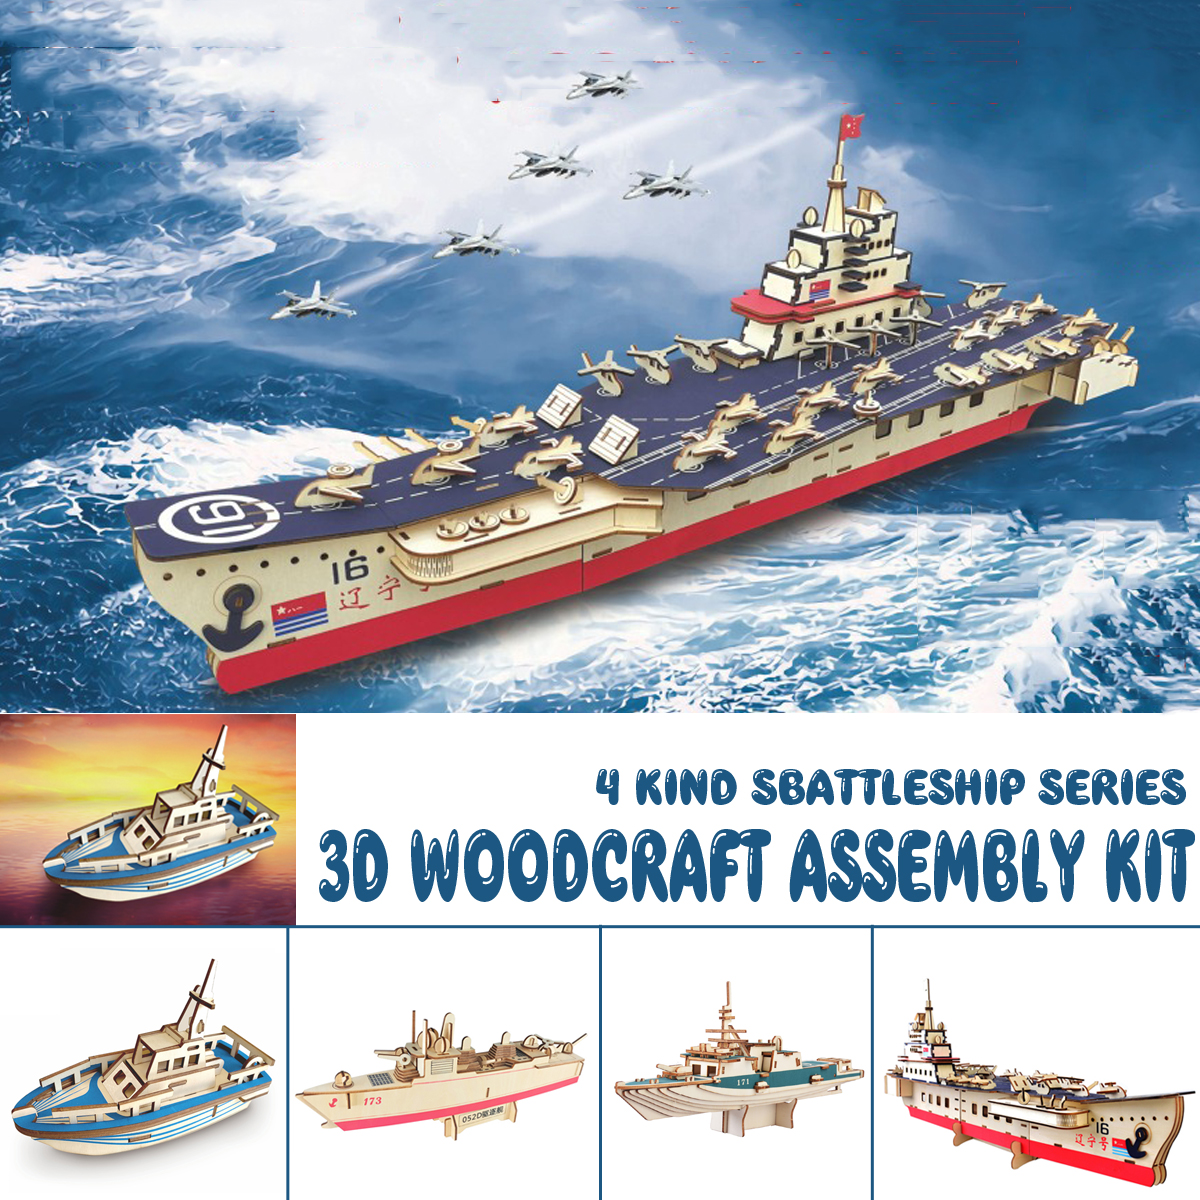 3D-Woodcraft-Assembly-Battleship-Series-Kit-Jigsaw-Puzzle-Toy-Decoration-Model-for-Kids-Gift-1632733-1